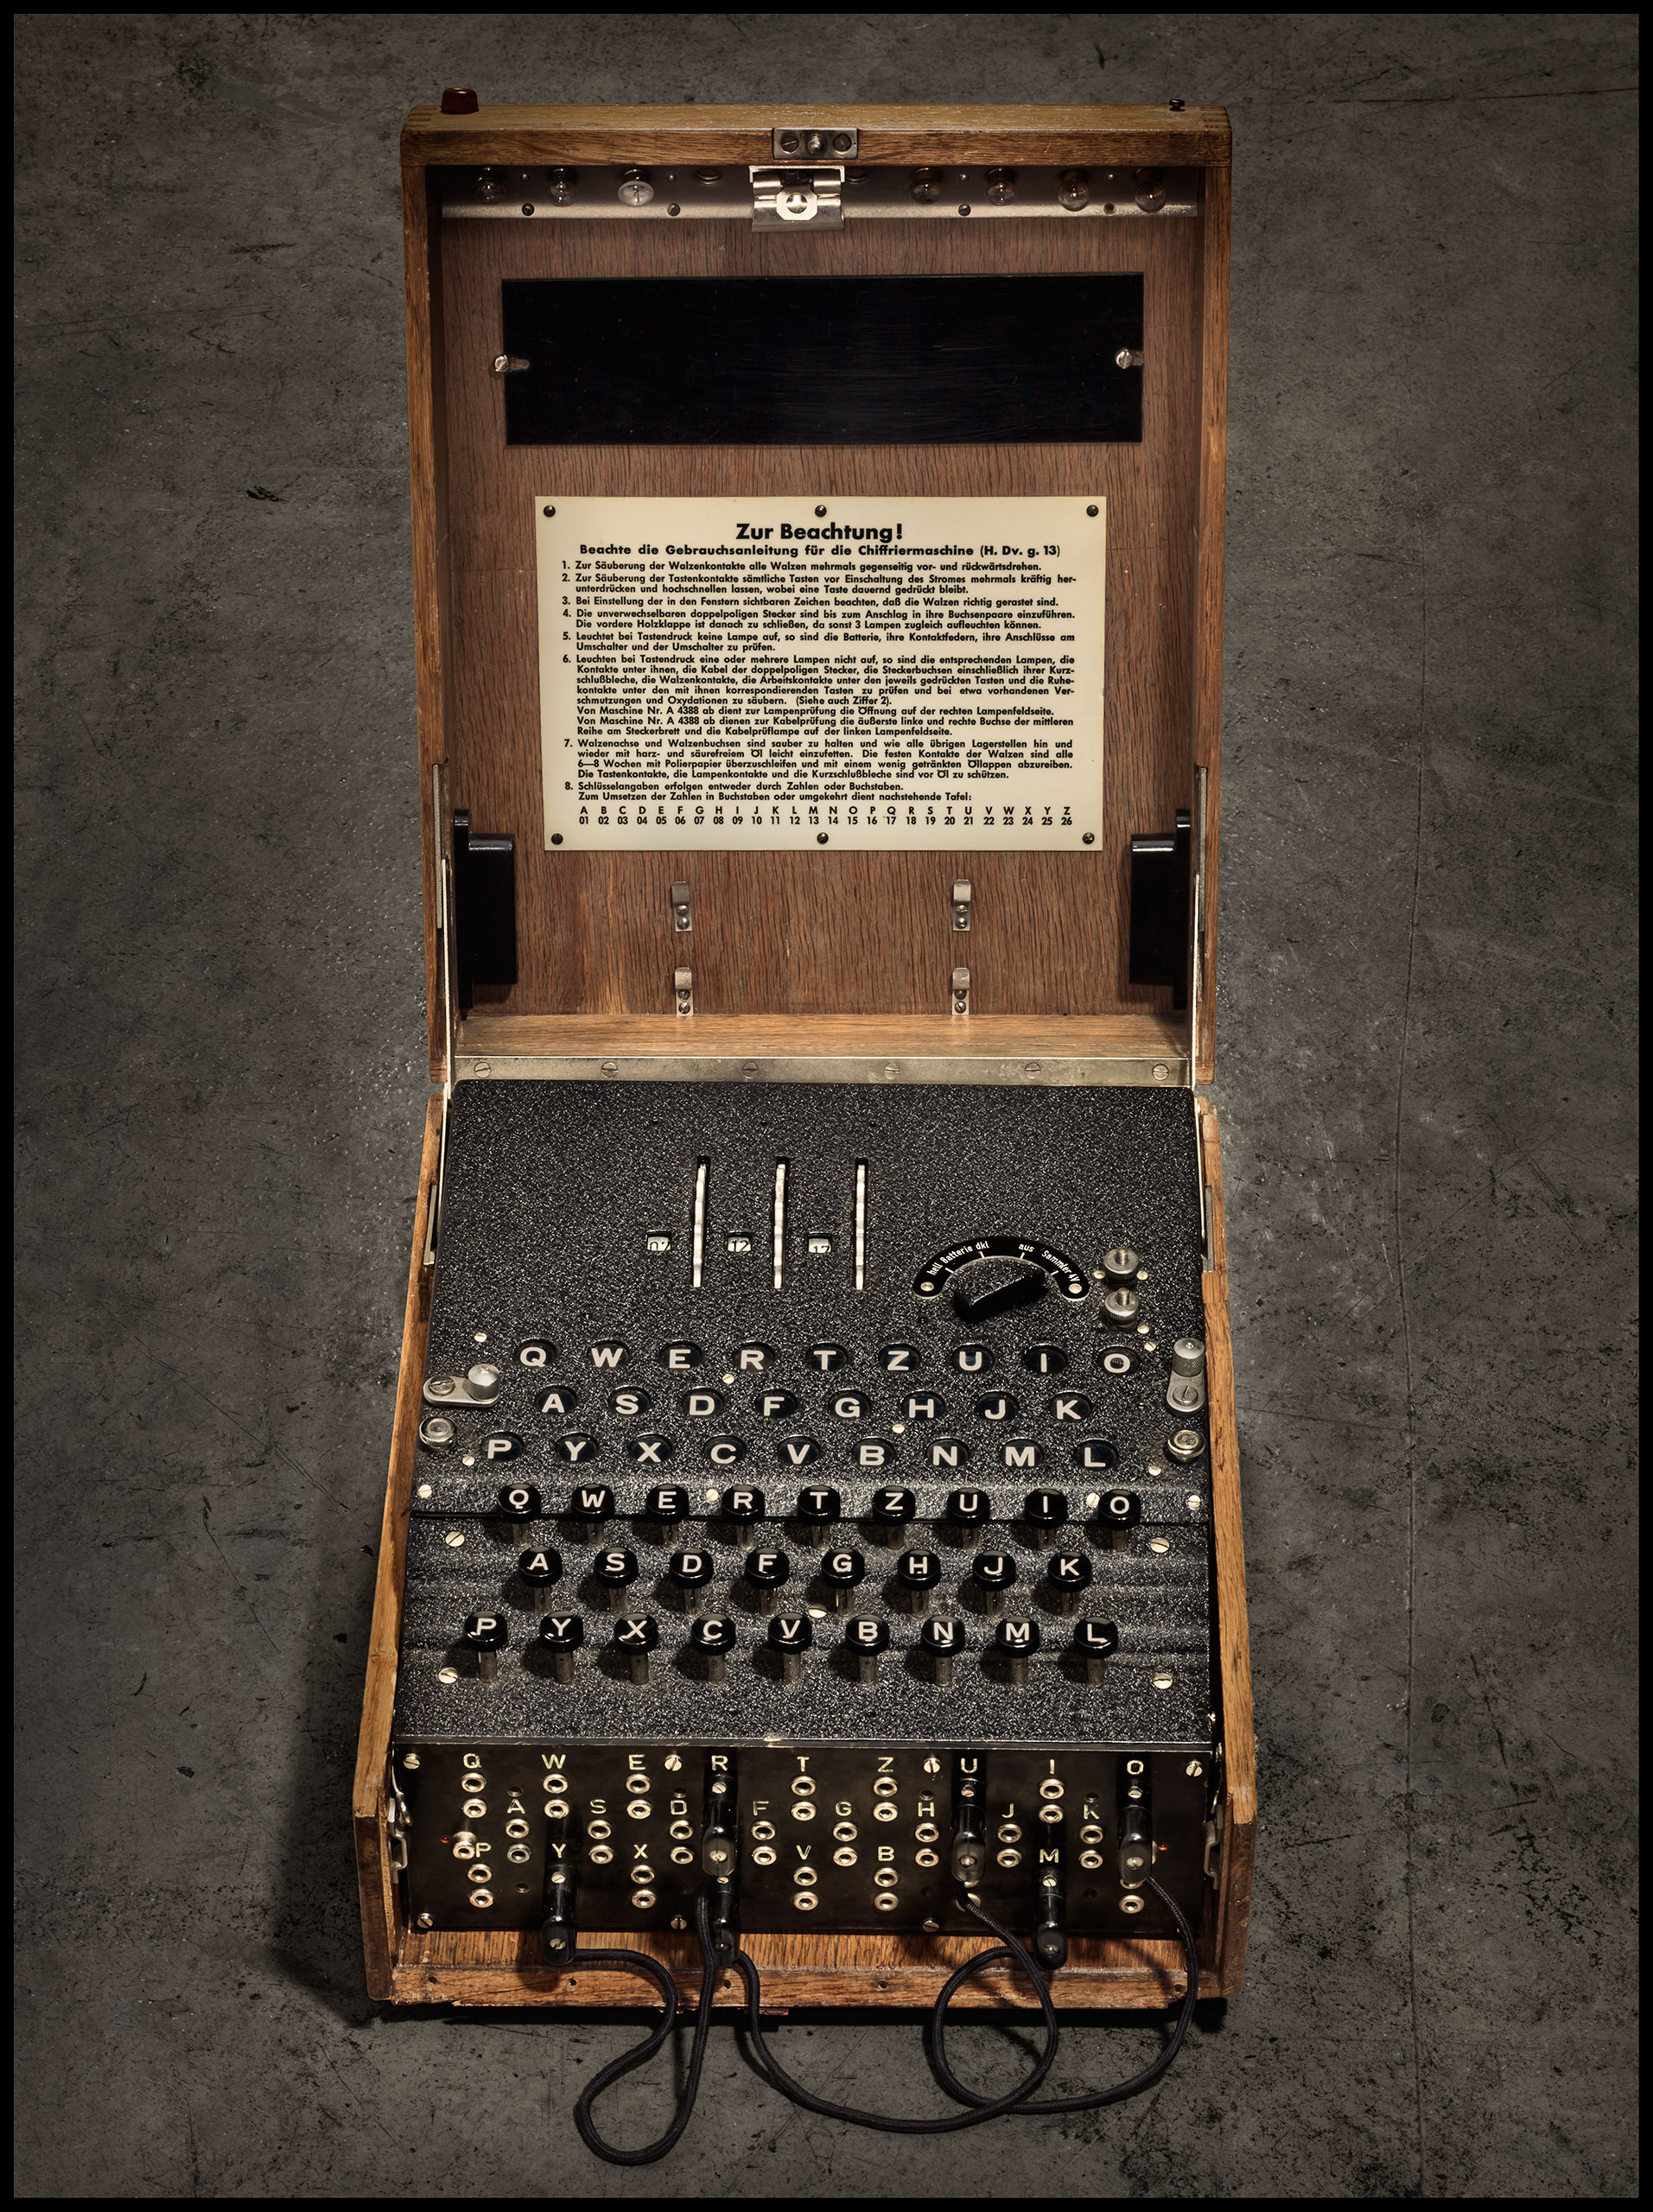 An Enigma machine courtesy of the Computer History Museum in Mountain View, California.